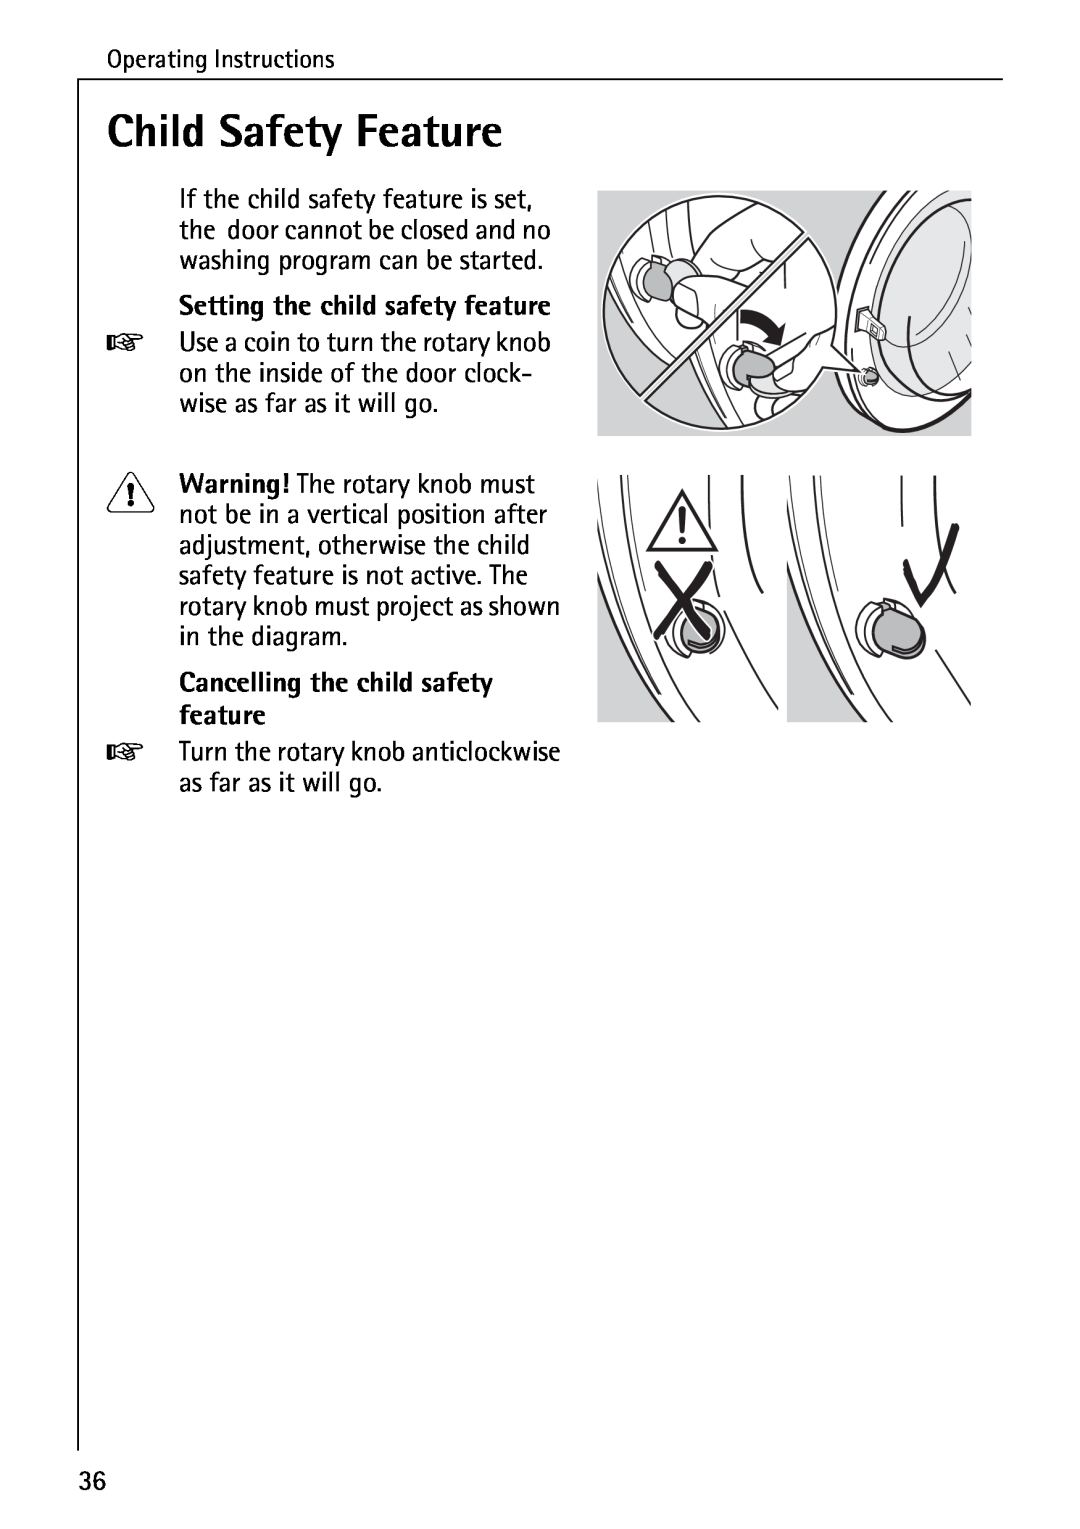 Electrolux 76639 manual Child Safety Feature, Setting the child safety feature, Cancelling the child safety feature 